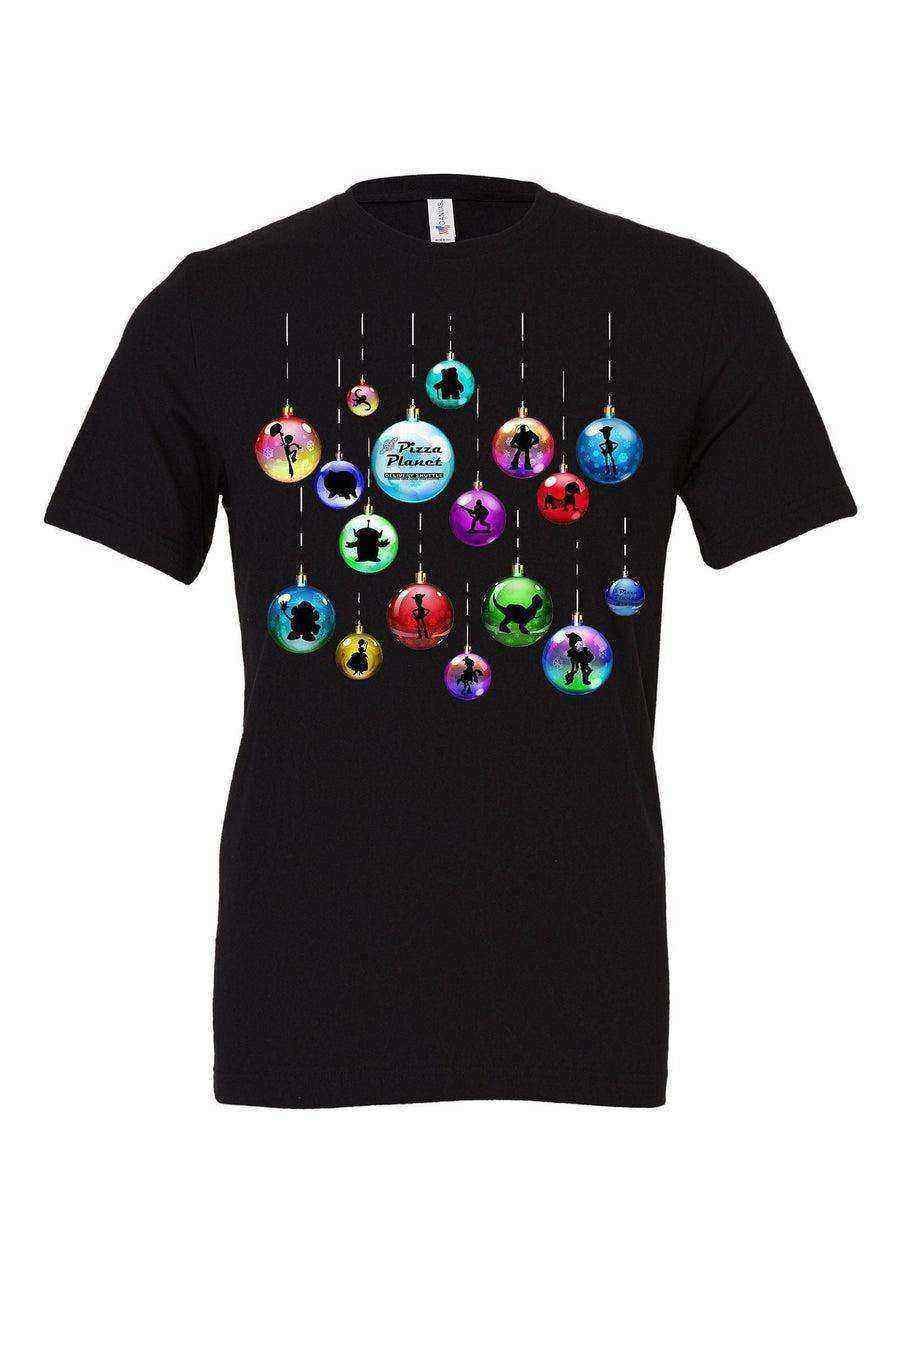 Youth | Toy Story Ornaments Shirt | Christmas In Tee | Christmas - Dylan's Tees